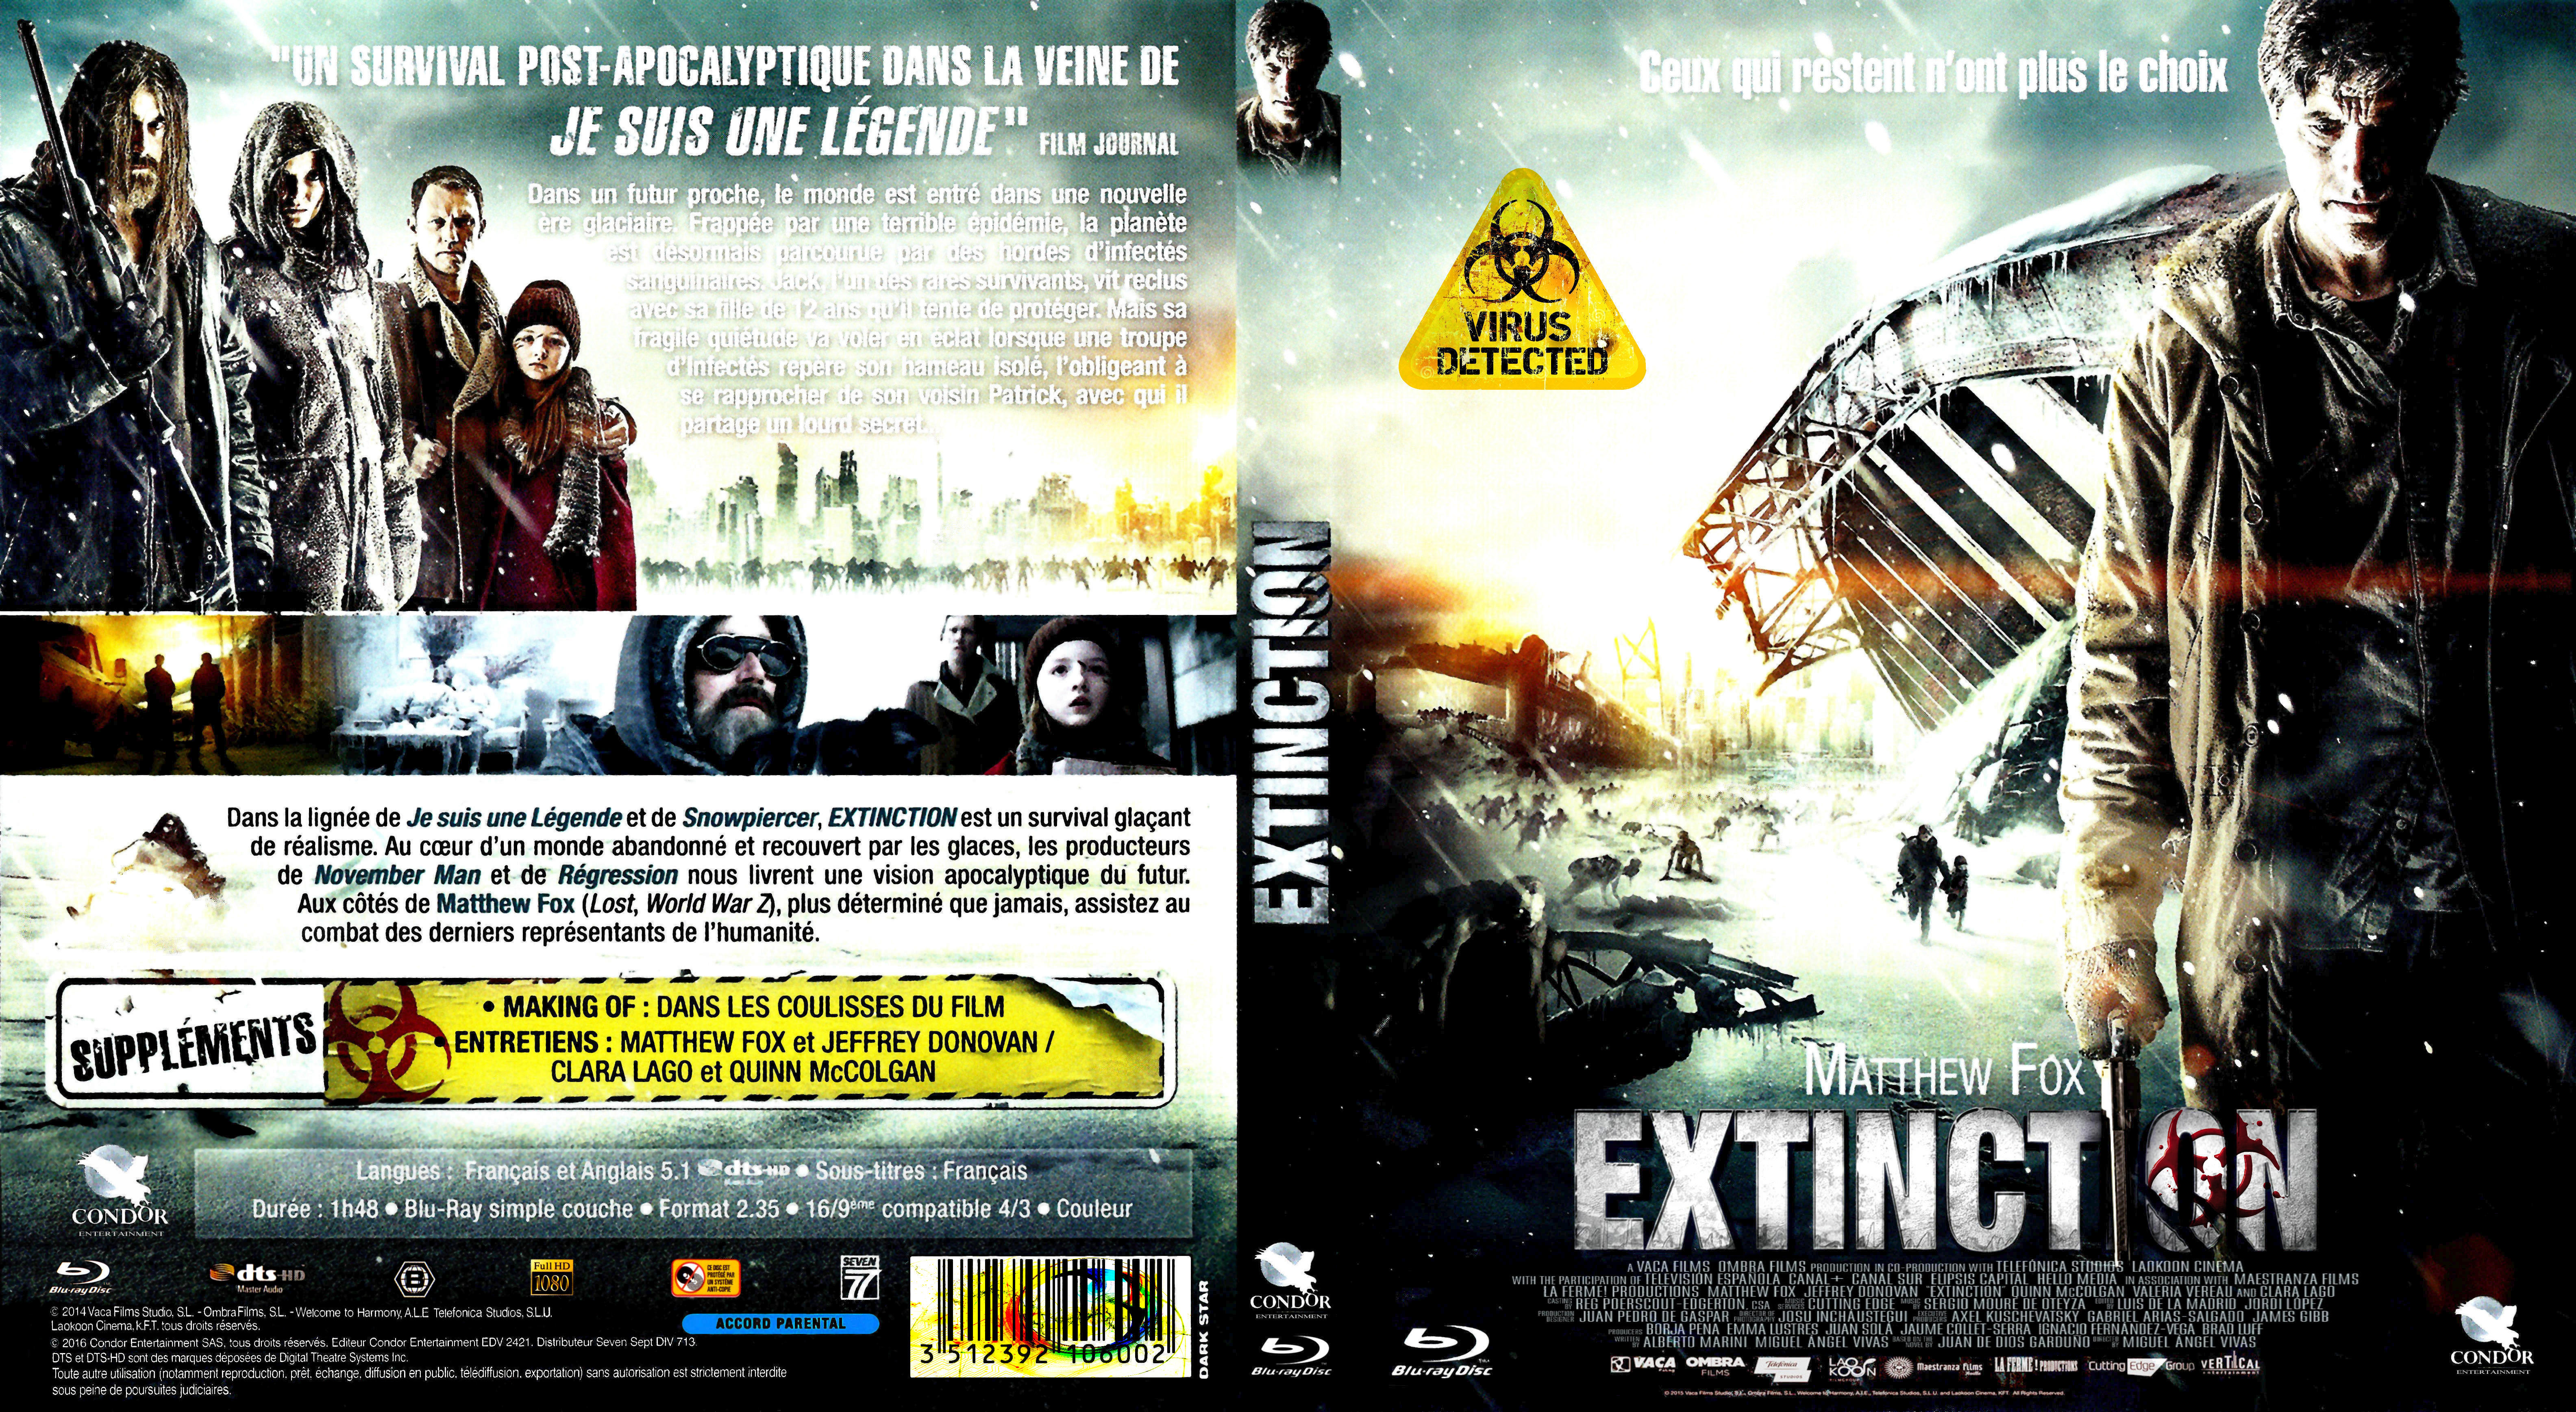 Jaquette DVD Extinction (BLU-RAY)